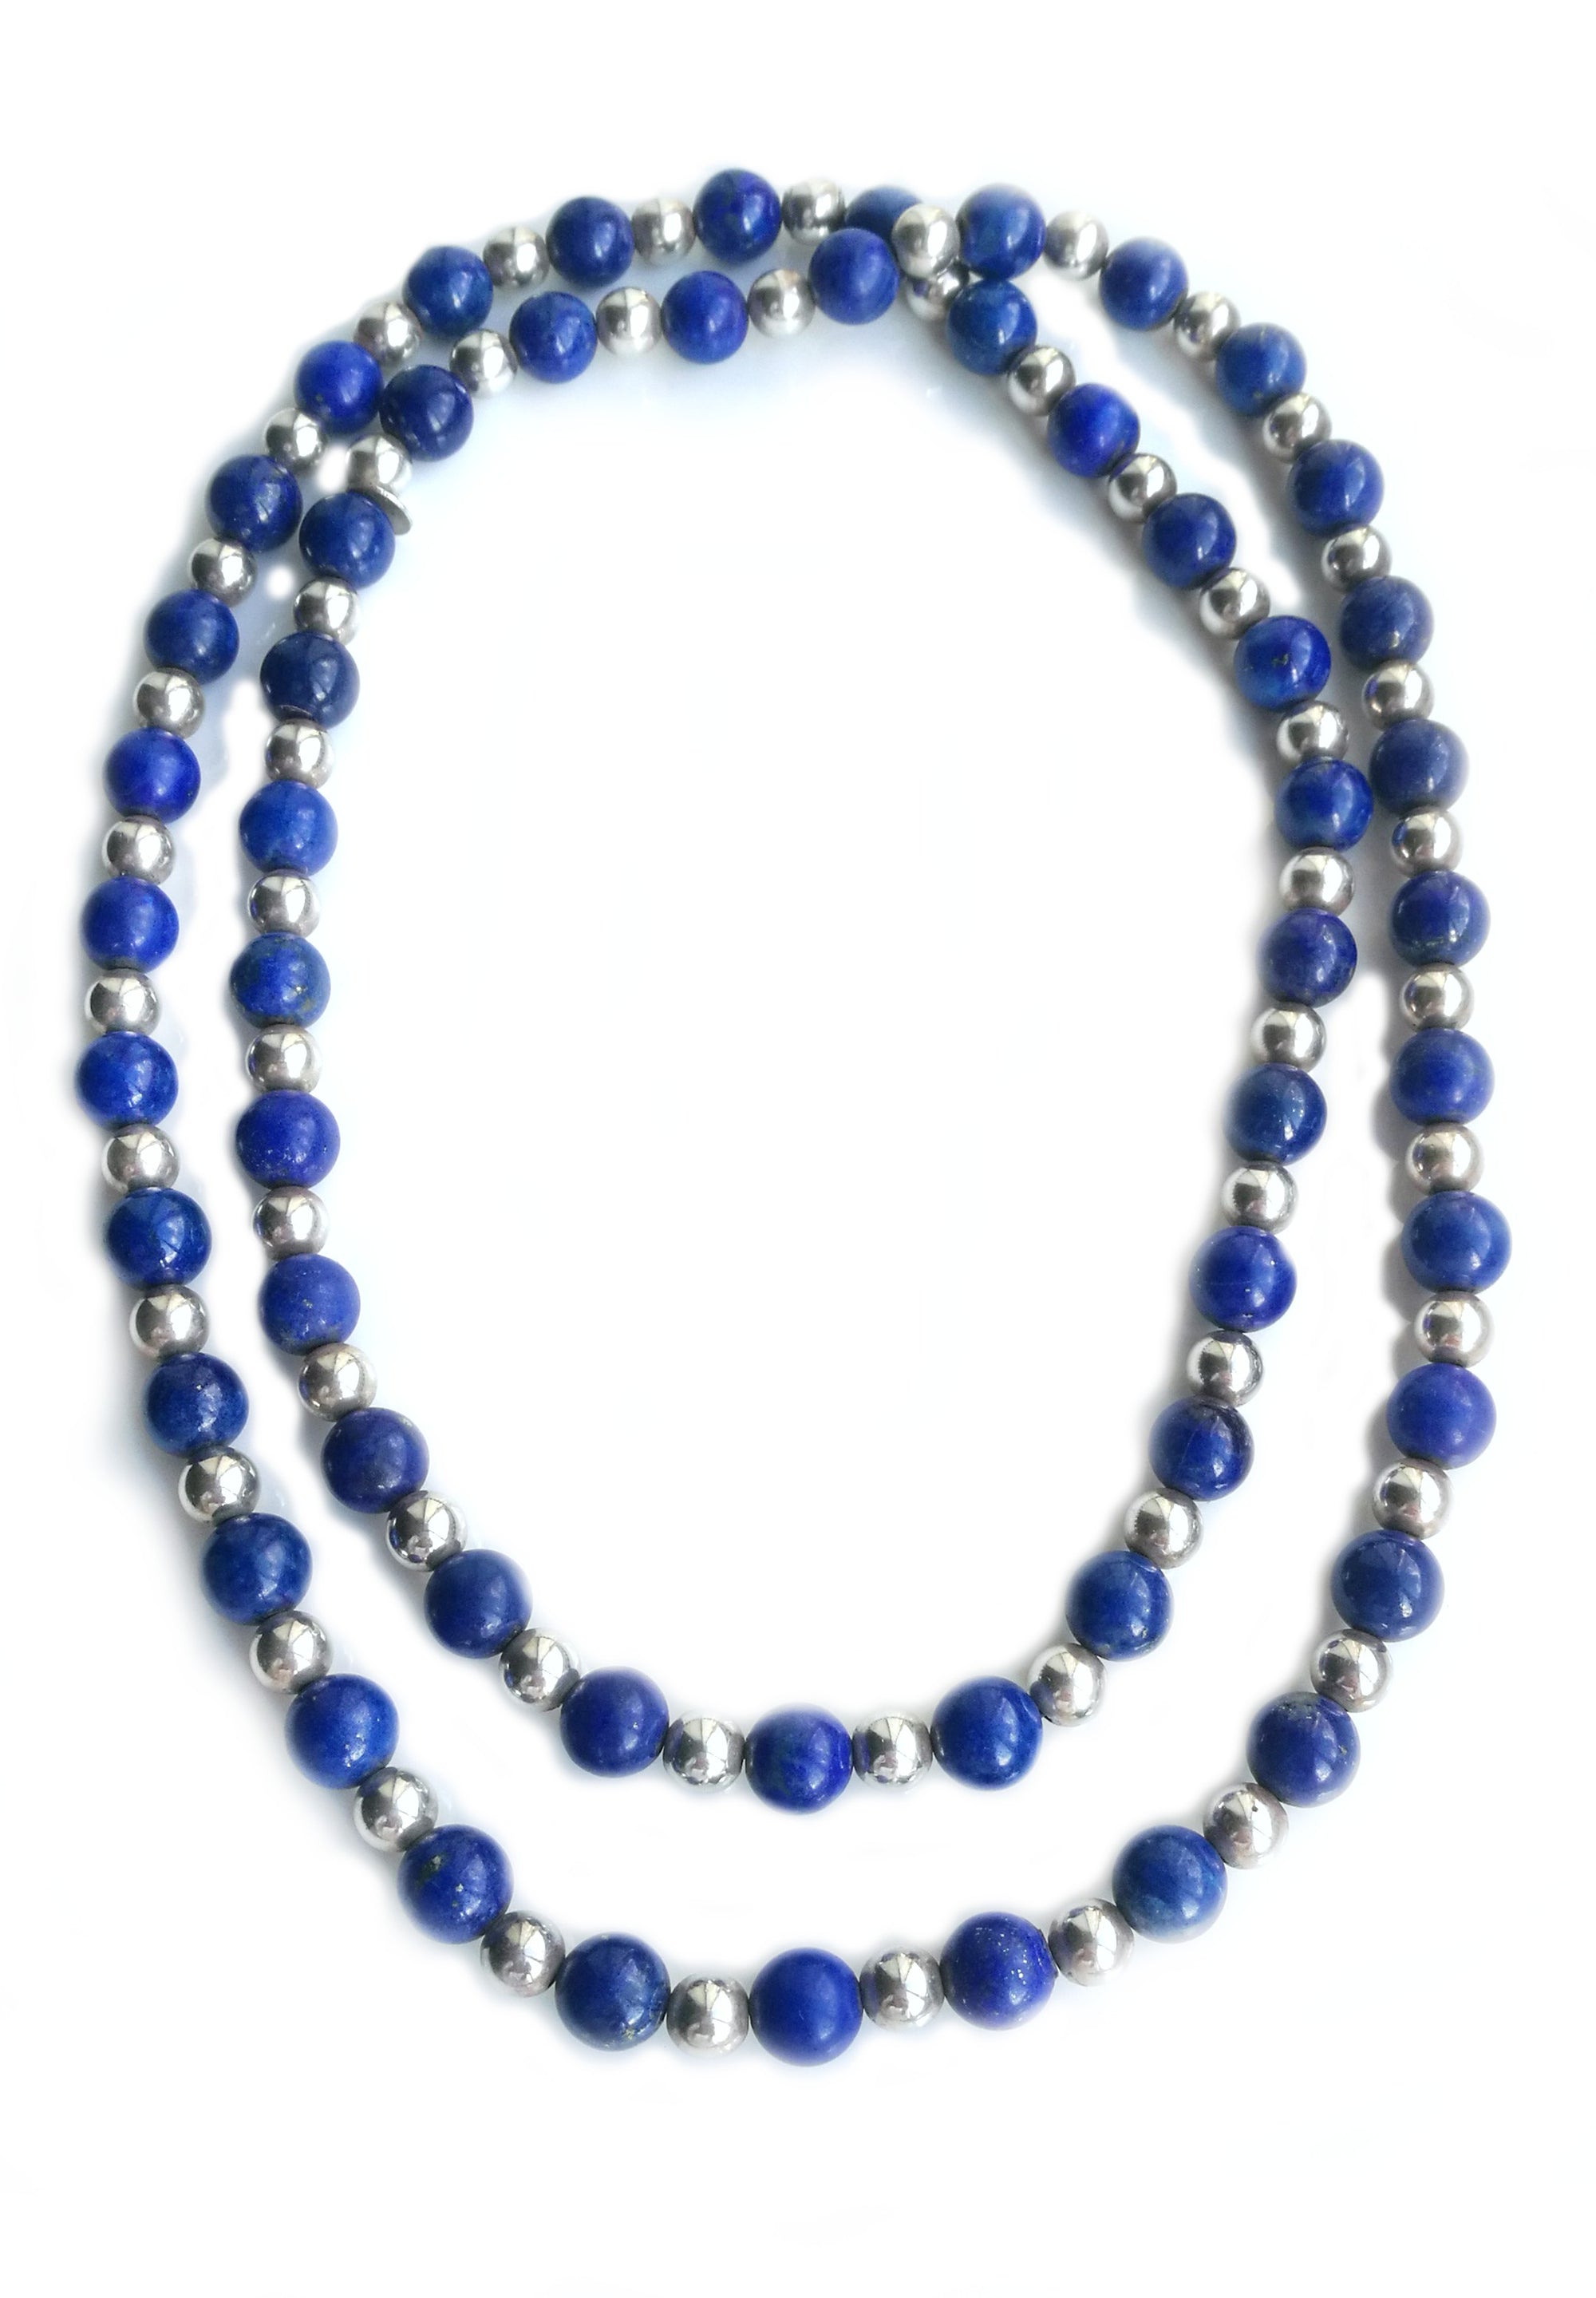 Tiffany & Co Sterling Silver Lapis Lazuli Bead Sautoir Necklace 30 in